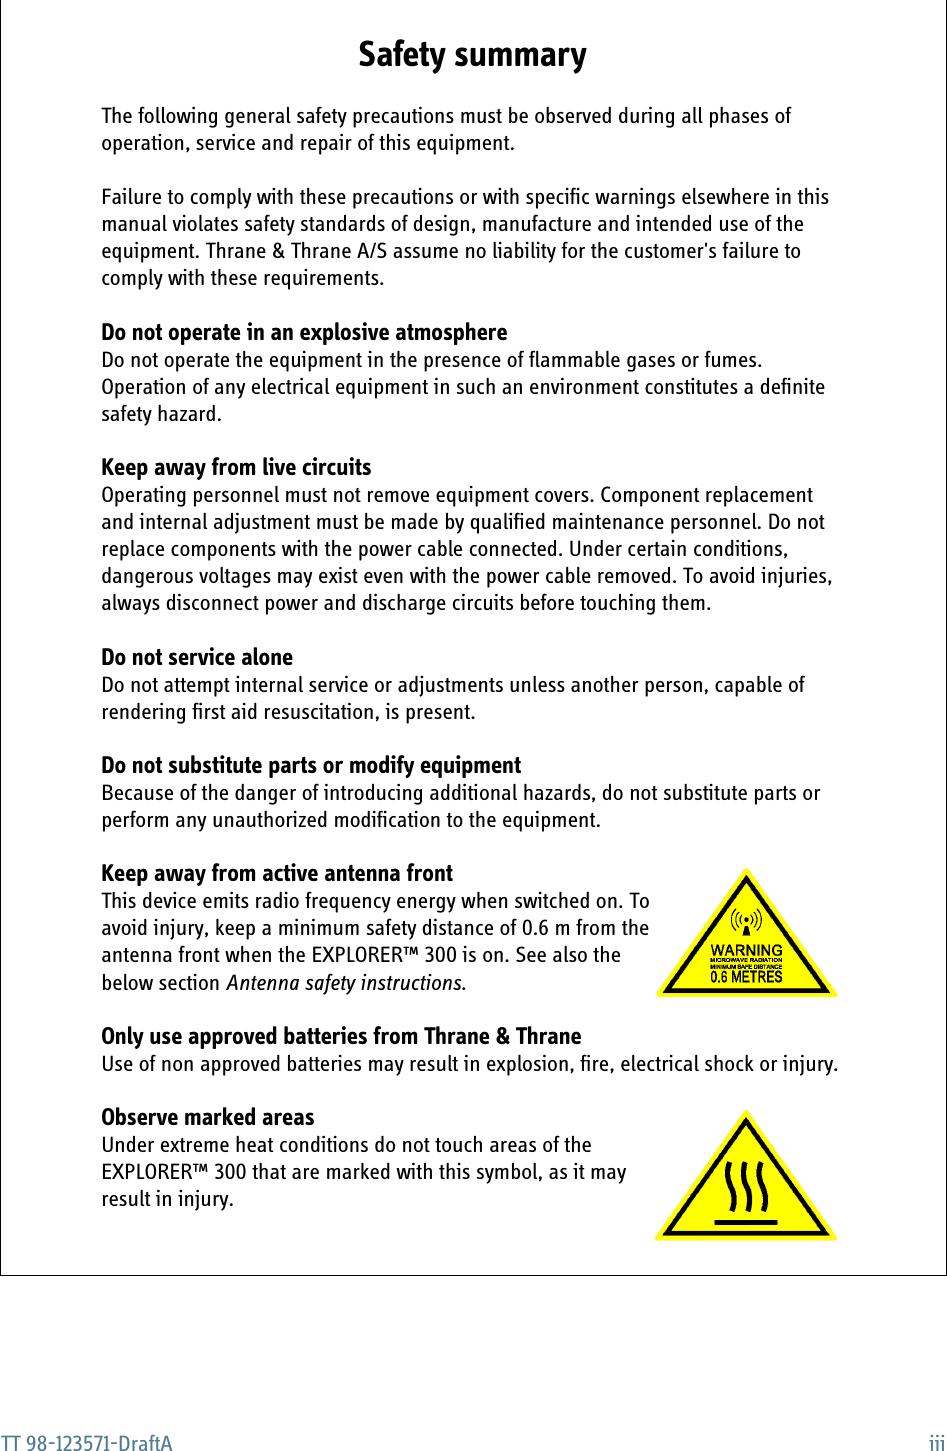 TT 98-123571-DraftA iiiSafety summary 1The following general safety precautions must be observed during all phases of operation, service and repair of this equipment. Failure to comply with these precautions or with specific warnings elsewhere in this manual violates safety standards of design, manufacture and intended use of the equipment. Thrane &amp; Thrane A/S assume no liability for the customer&apos;s failure to comply with these requirements.Do not operate in an explosive atmosphereDo not operate the equipment in the presence of flammable gases or fumes. Operation of any electrical equipment in such an environment constitutes a definite safety hazard.Keep away from live circuitsOperating personnel must not remove equipment covers. Component replacement and internal adjustment must be made by qualified maintenance personnel. Do not replace components with the power cable connected. Under certain conditions, dangerous voltages may exist even with the power cable removed. To avoid injuries, always disconnect power and discharge circuits before touching them.Do not service aloneDo not attempt internal service or adjustments unless another person, capable of rendering first aid resuscitation, is present.Do not substitute parts or modify equipmentBecause of the danger of introducing additional hazards, do not substitute parts or perform any unauthorized modification to the equipment.Keep away from active antenna frontThis device emits radio frequency energy when switched on. To avoid injury, keep a minimum safety distance of 0.6 m from the antenna front when the EXPLORER™ 300 is on. See also the below section Antenna safety instructions.Only use approved batteries from Thrane &amp; ThraneUse of non approved batteries may result in explosion, fire, electrical shock or injury. Observe marked areasUnder extreme heat conditions do not touch areas of the EXPLORER™ 300 that are marked with this symbol, as it may result in injury. 